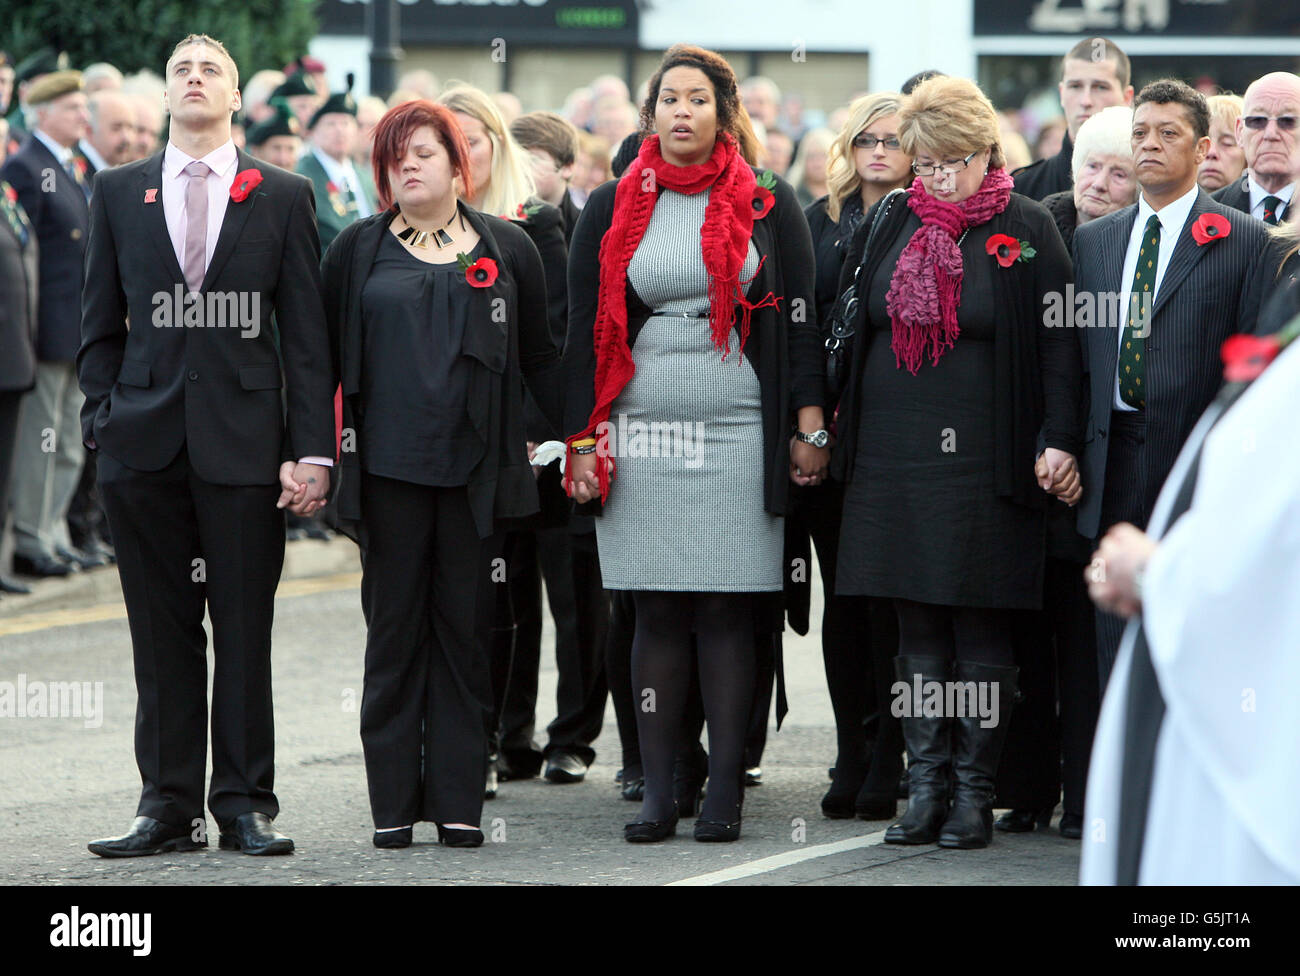 Leslie (right) and Rosemary (second right), parents of Corporal Channing  Day, who was killed in Afghanistan, walk behind her coffin with her brother  Aaron and sisters Lauren and Lakan, as it is